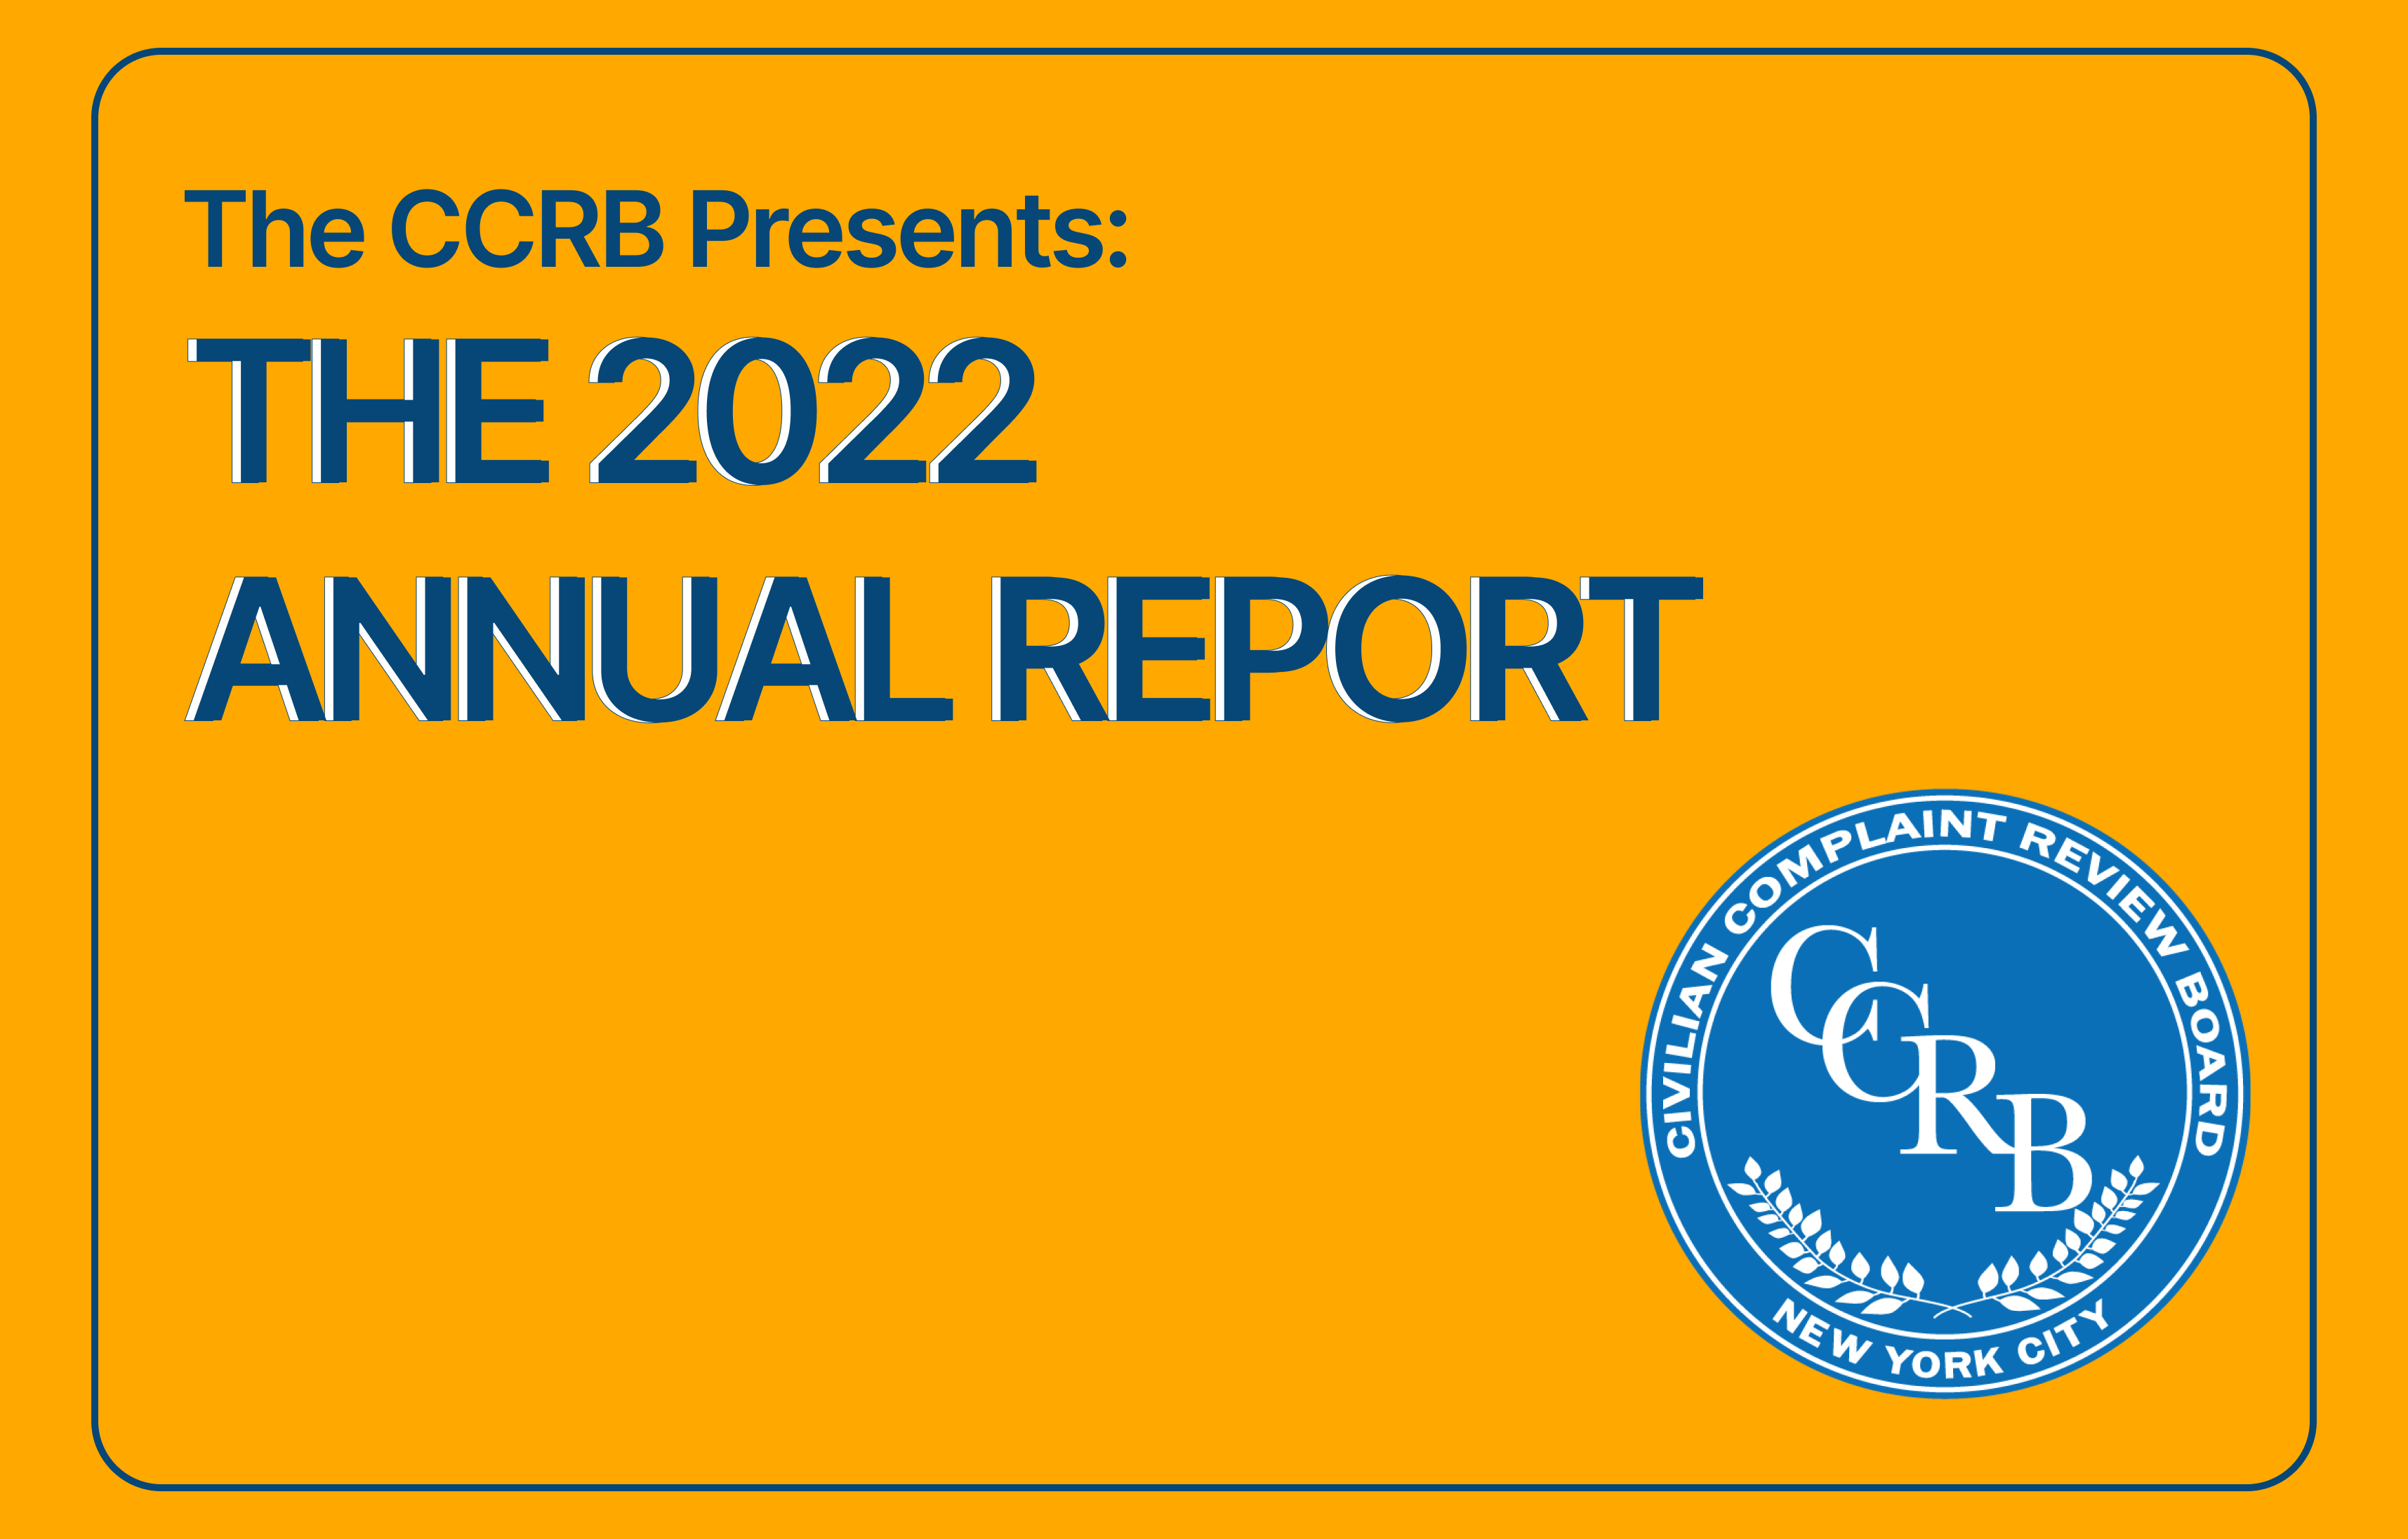 The CCRB Presents: the 2022 Annual Report 
                                           